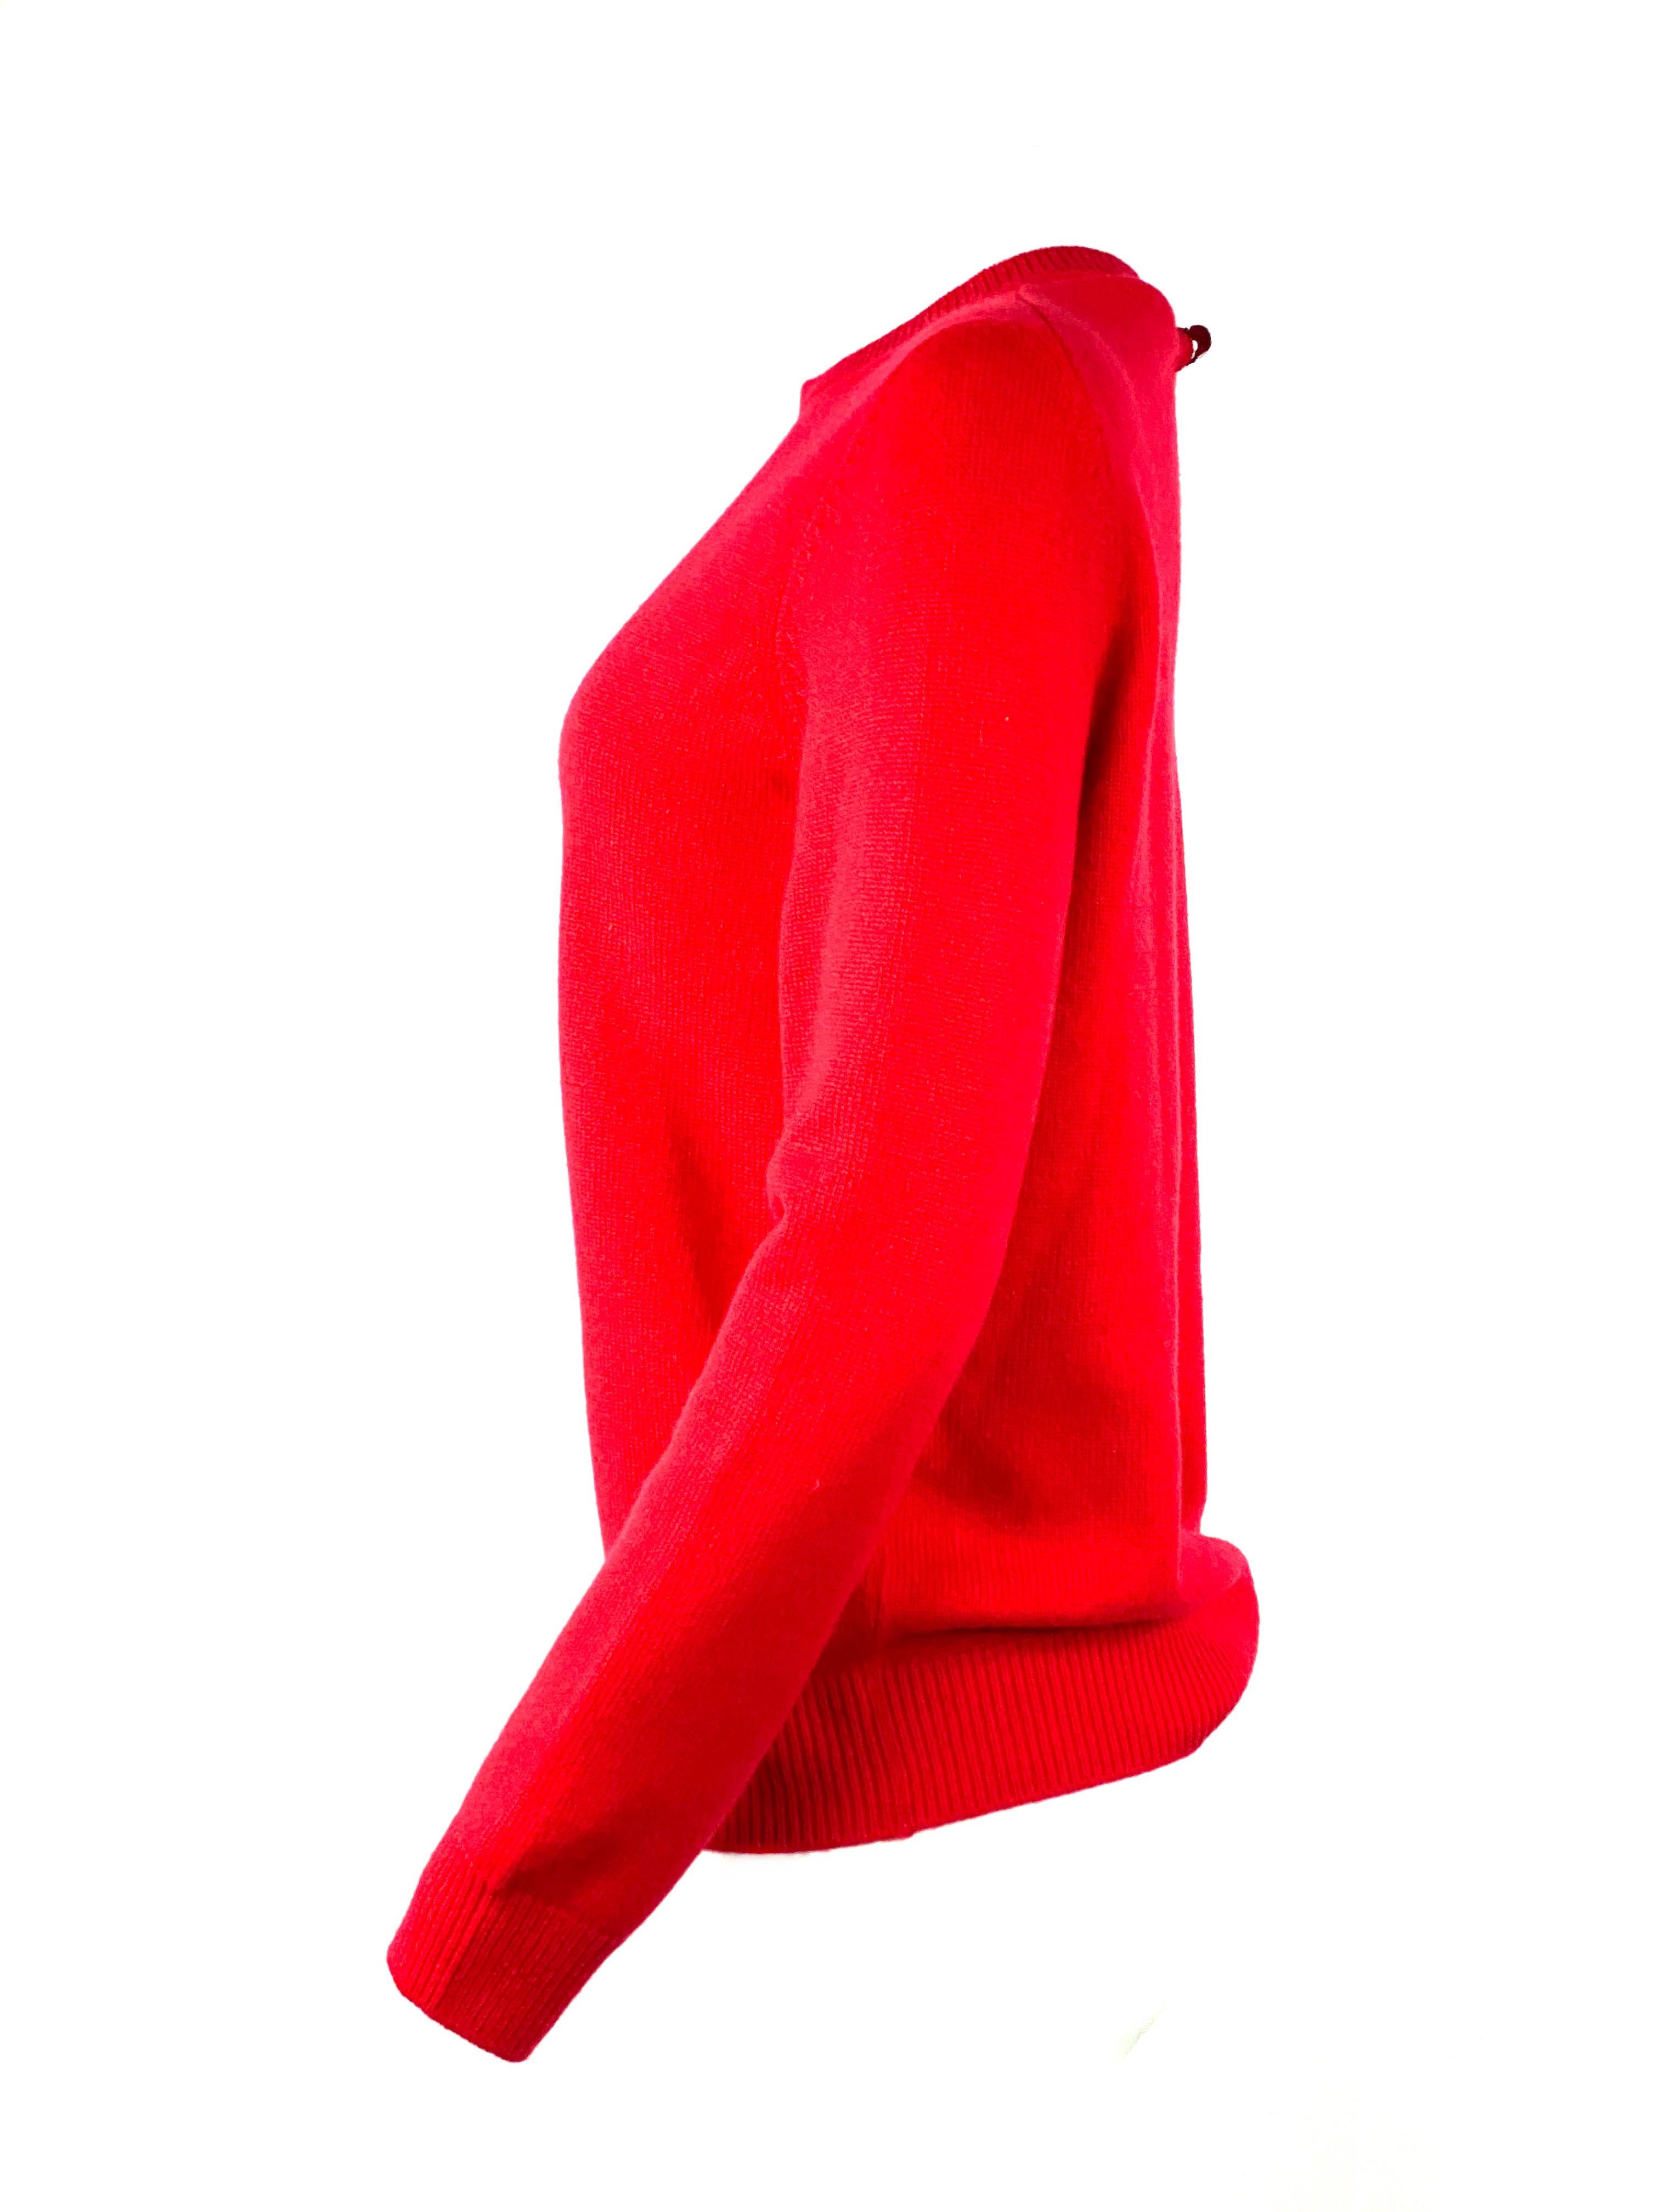 Louis Vuitton Red Cashmere Pullover Sweater Size S

Product details:
Size small
100% Cashmere
Silver tone hardware w/ LV flower logo detail on the back
Drop shape opening on the back, 8” long 
Long sleeves
Crew neck style
Made in Italy 
